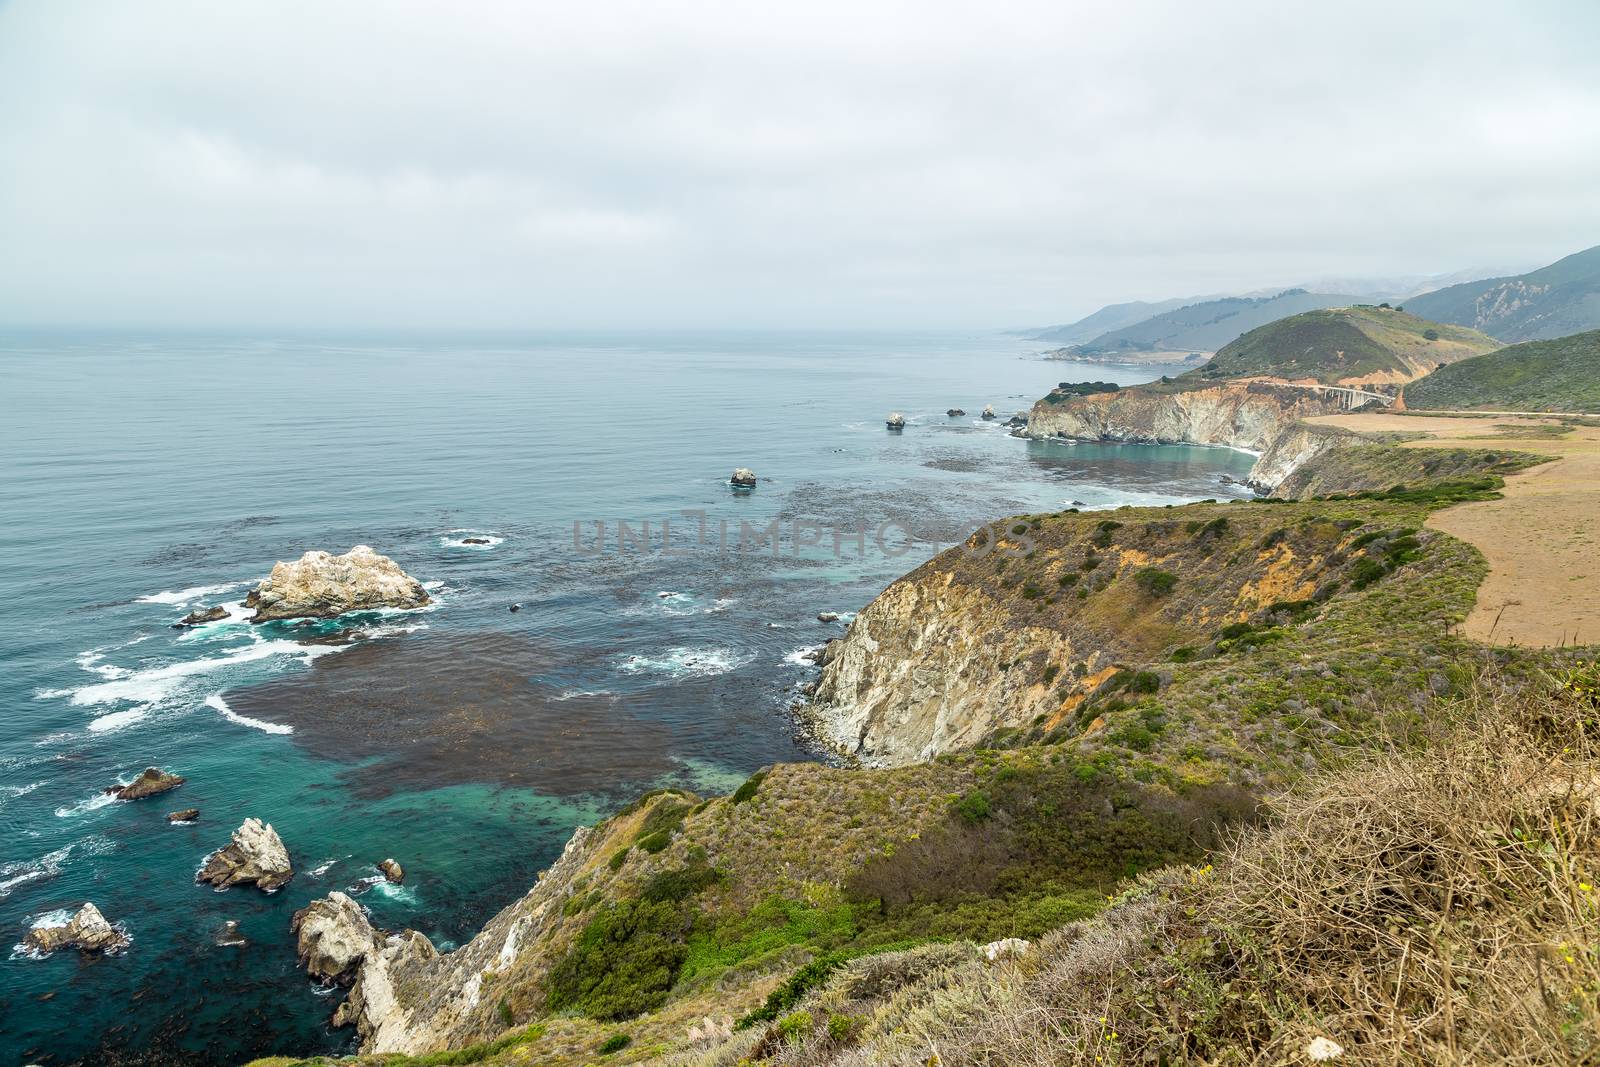 The Pacific Coast Highway (State Route 1) is a major north-south state highway that runs along most of the Pacific coastline of the U.S. state of California.